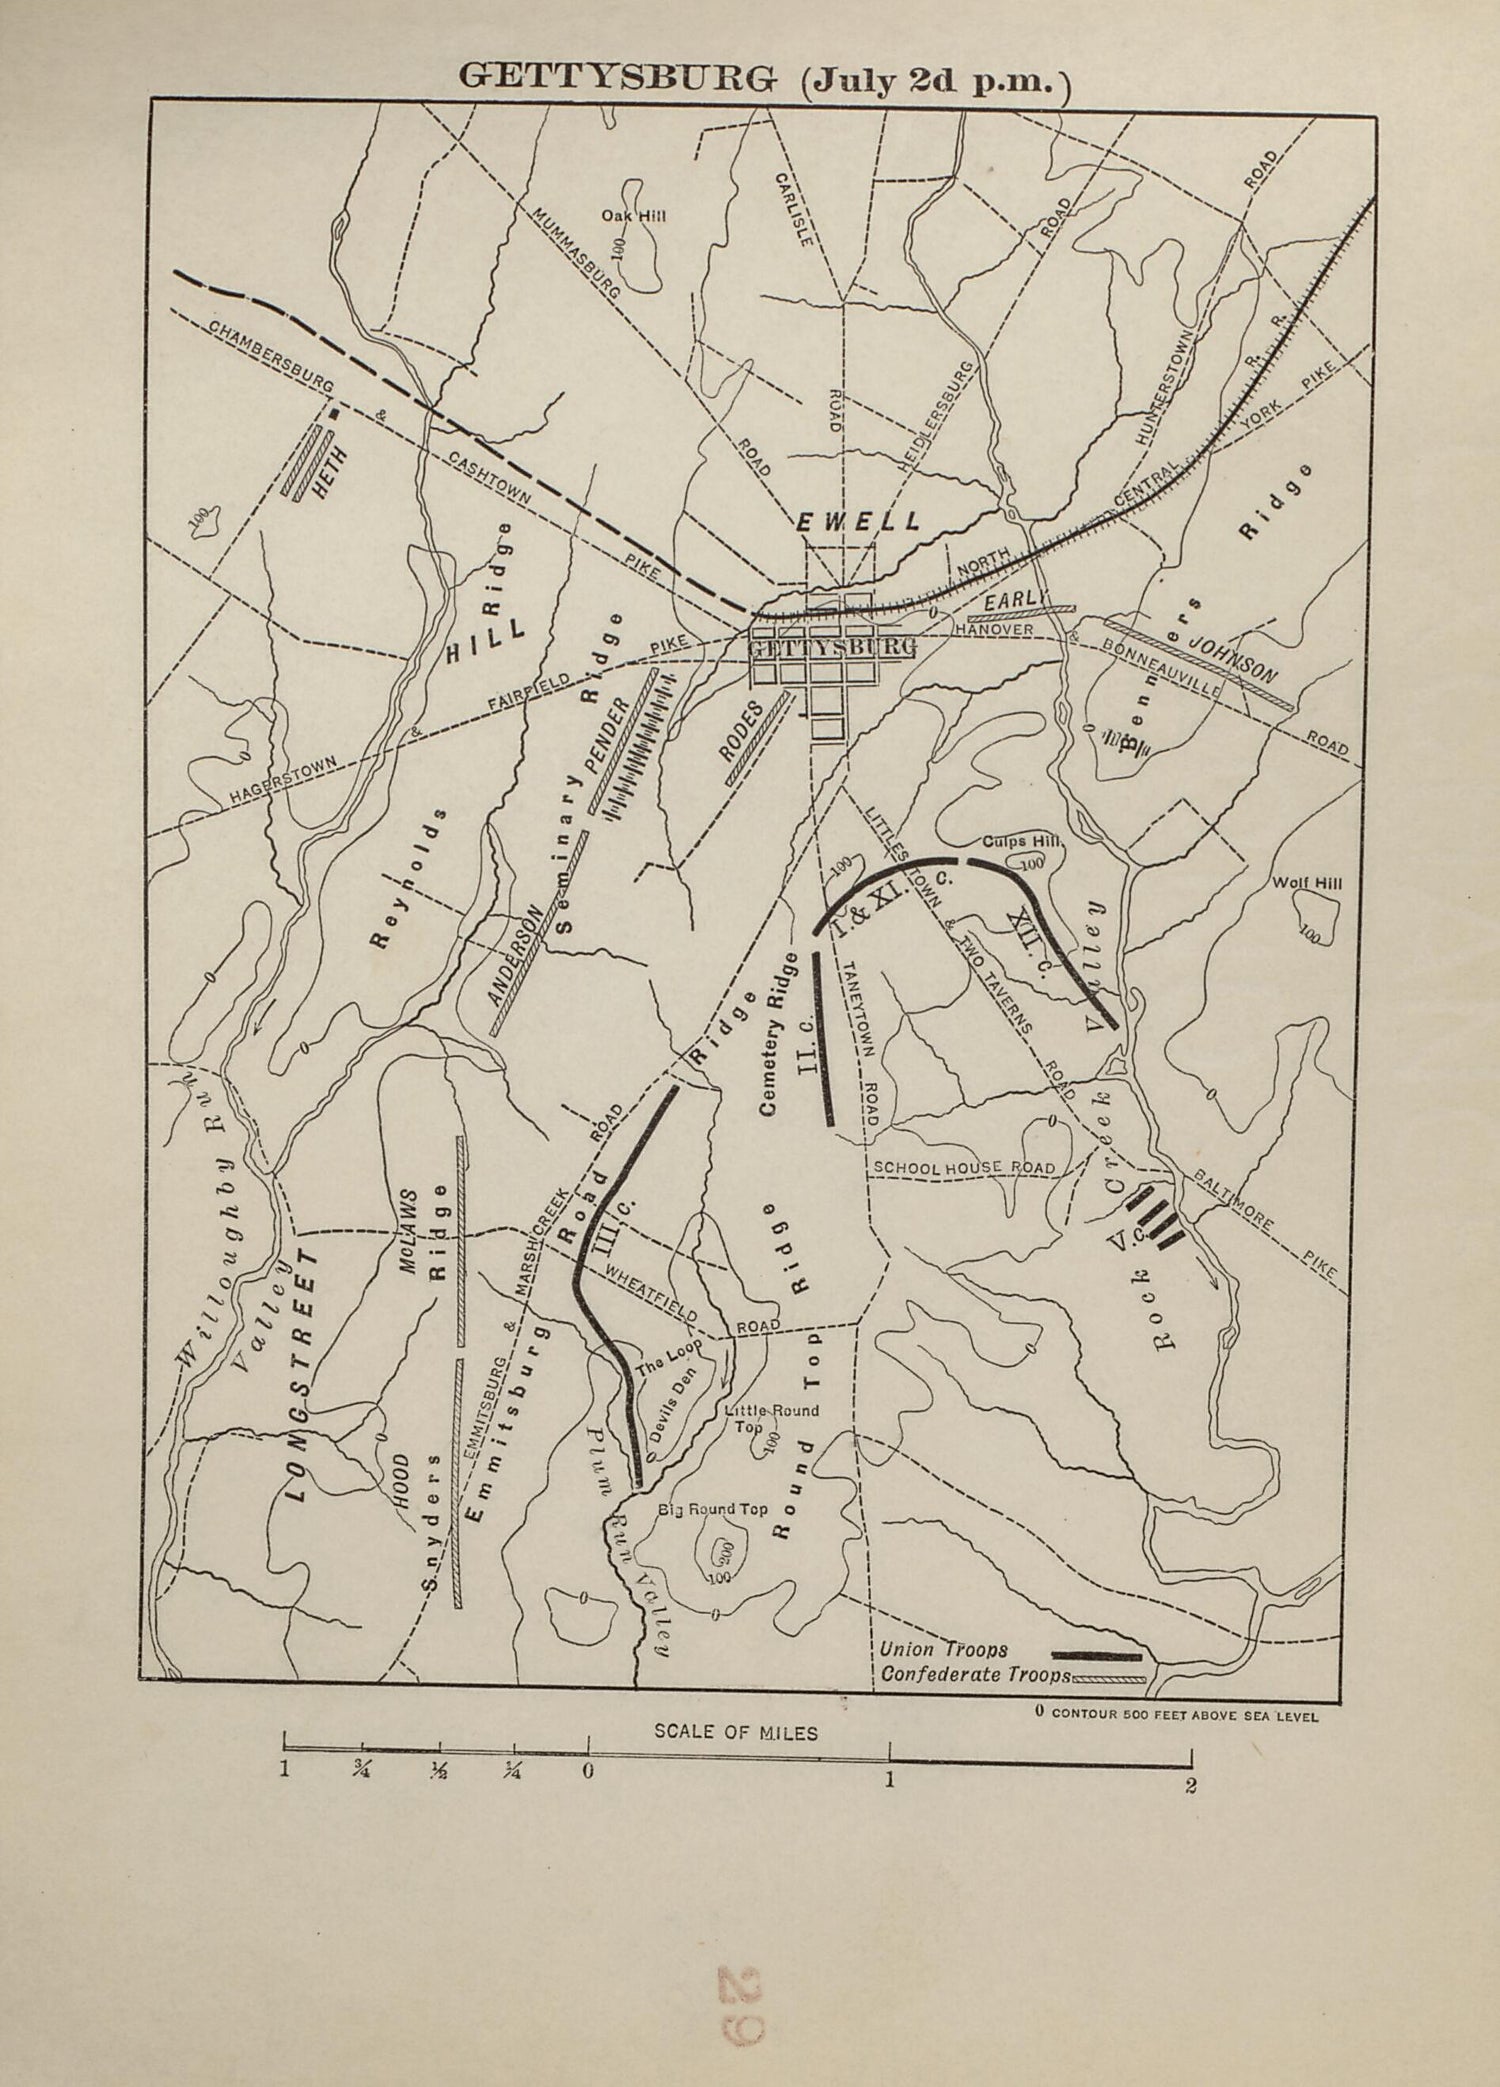 This old map of Gettysburg (July 2d P.m.) from American Civil War Atlas from 1914 was created by G. J. (Gustav Joseph) Fiebeger in 1914